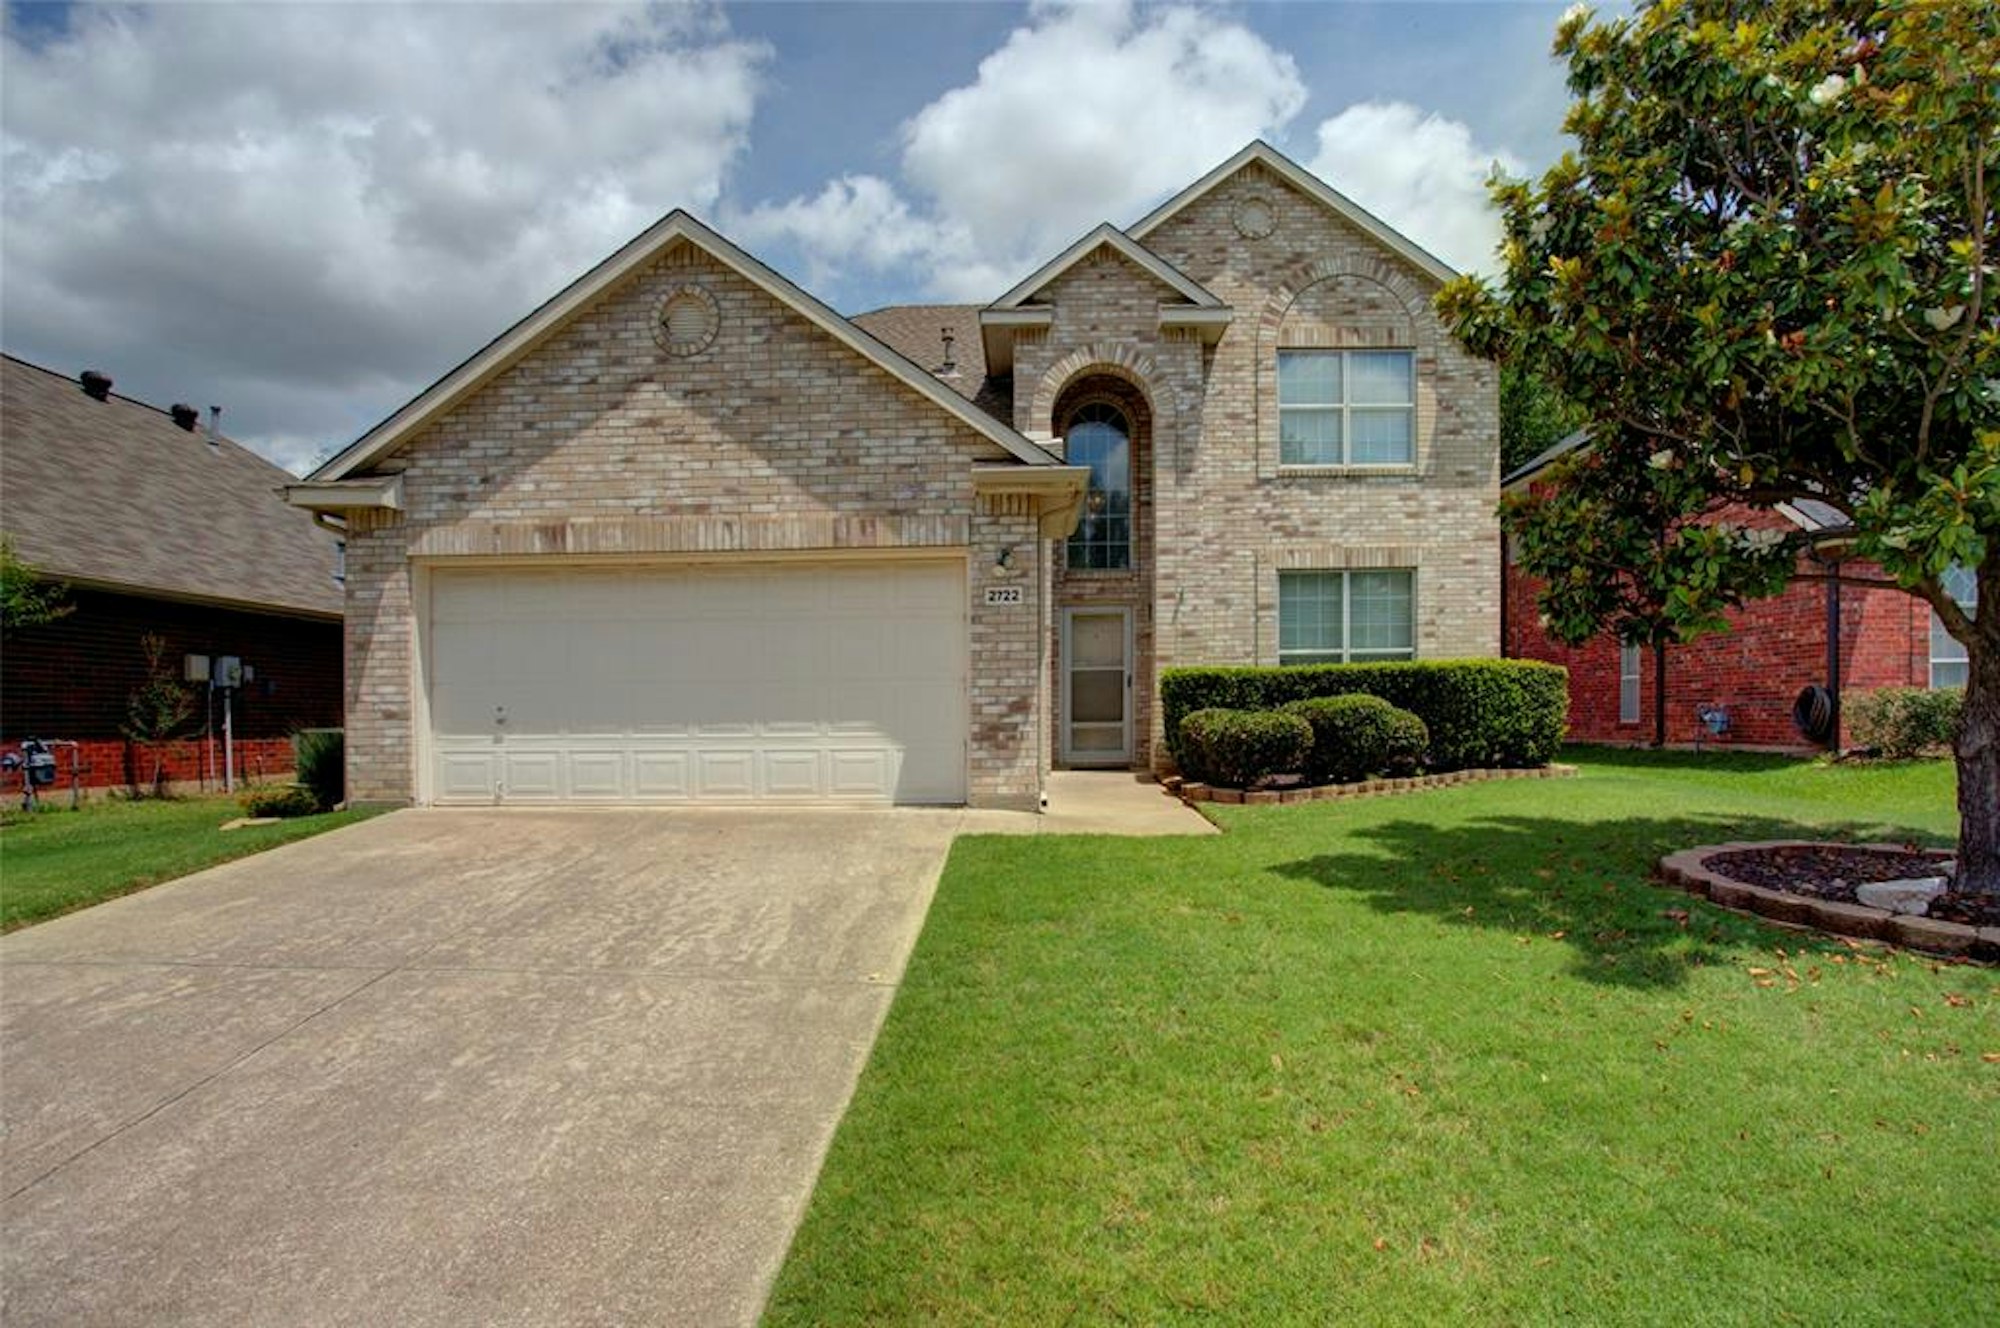 Photo 1 of 17 - 2722 Chatsworth Dr, Grapevine, TX 76051